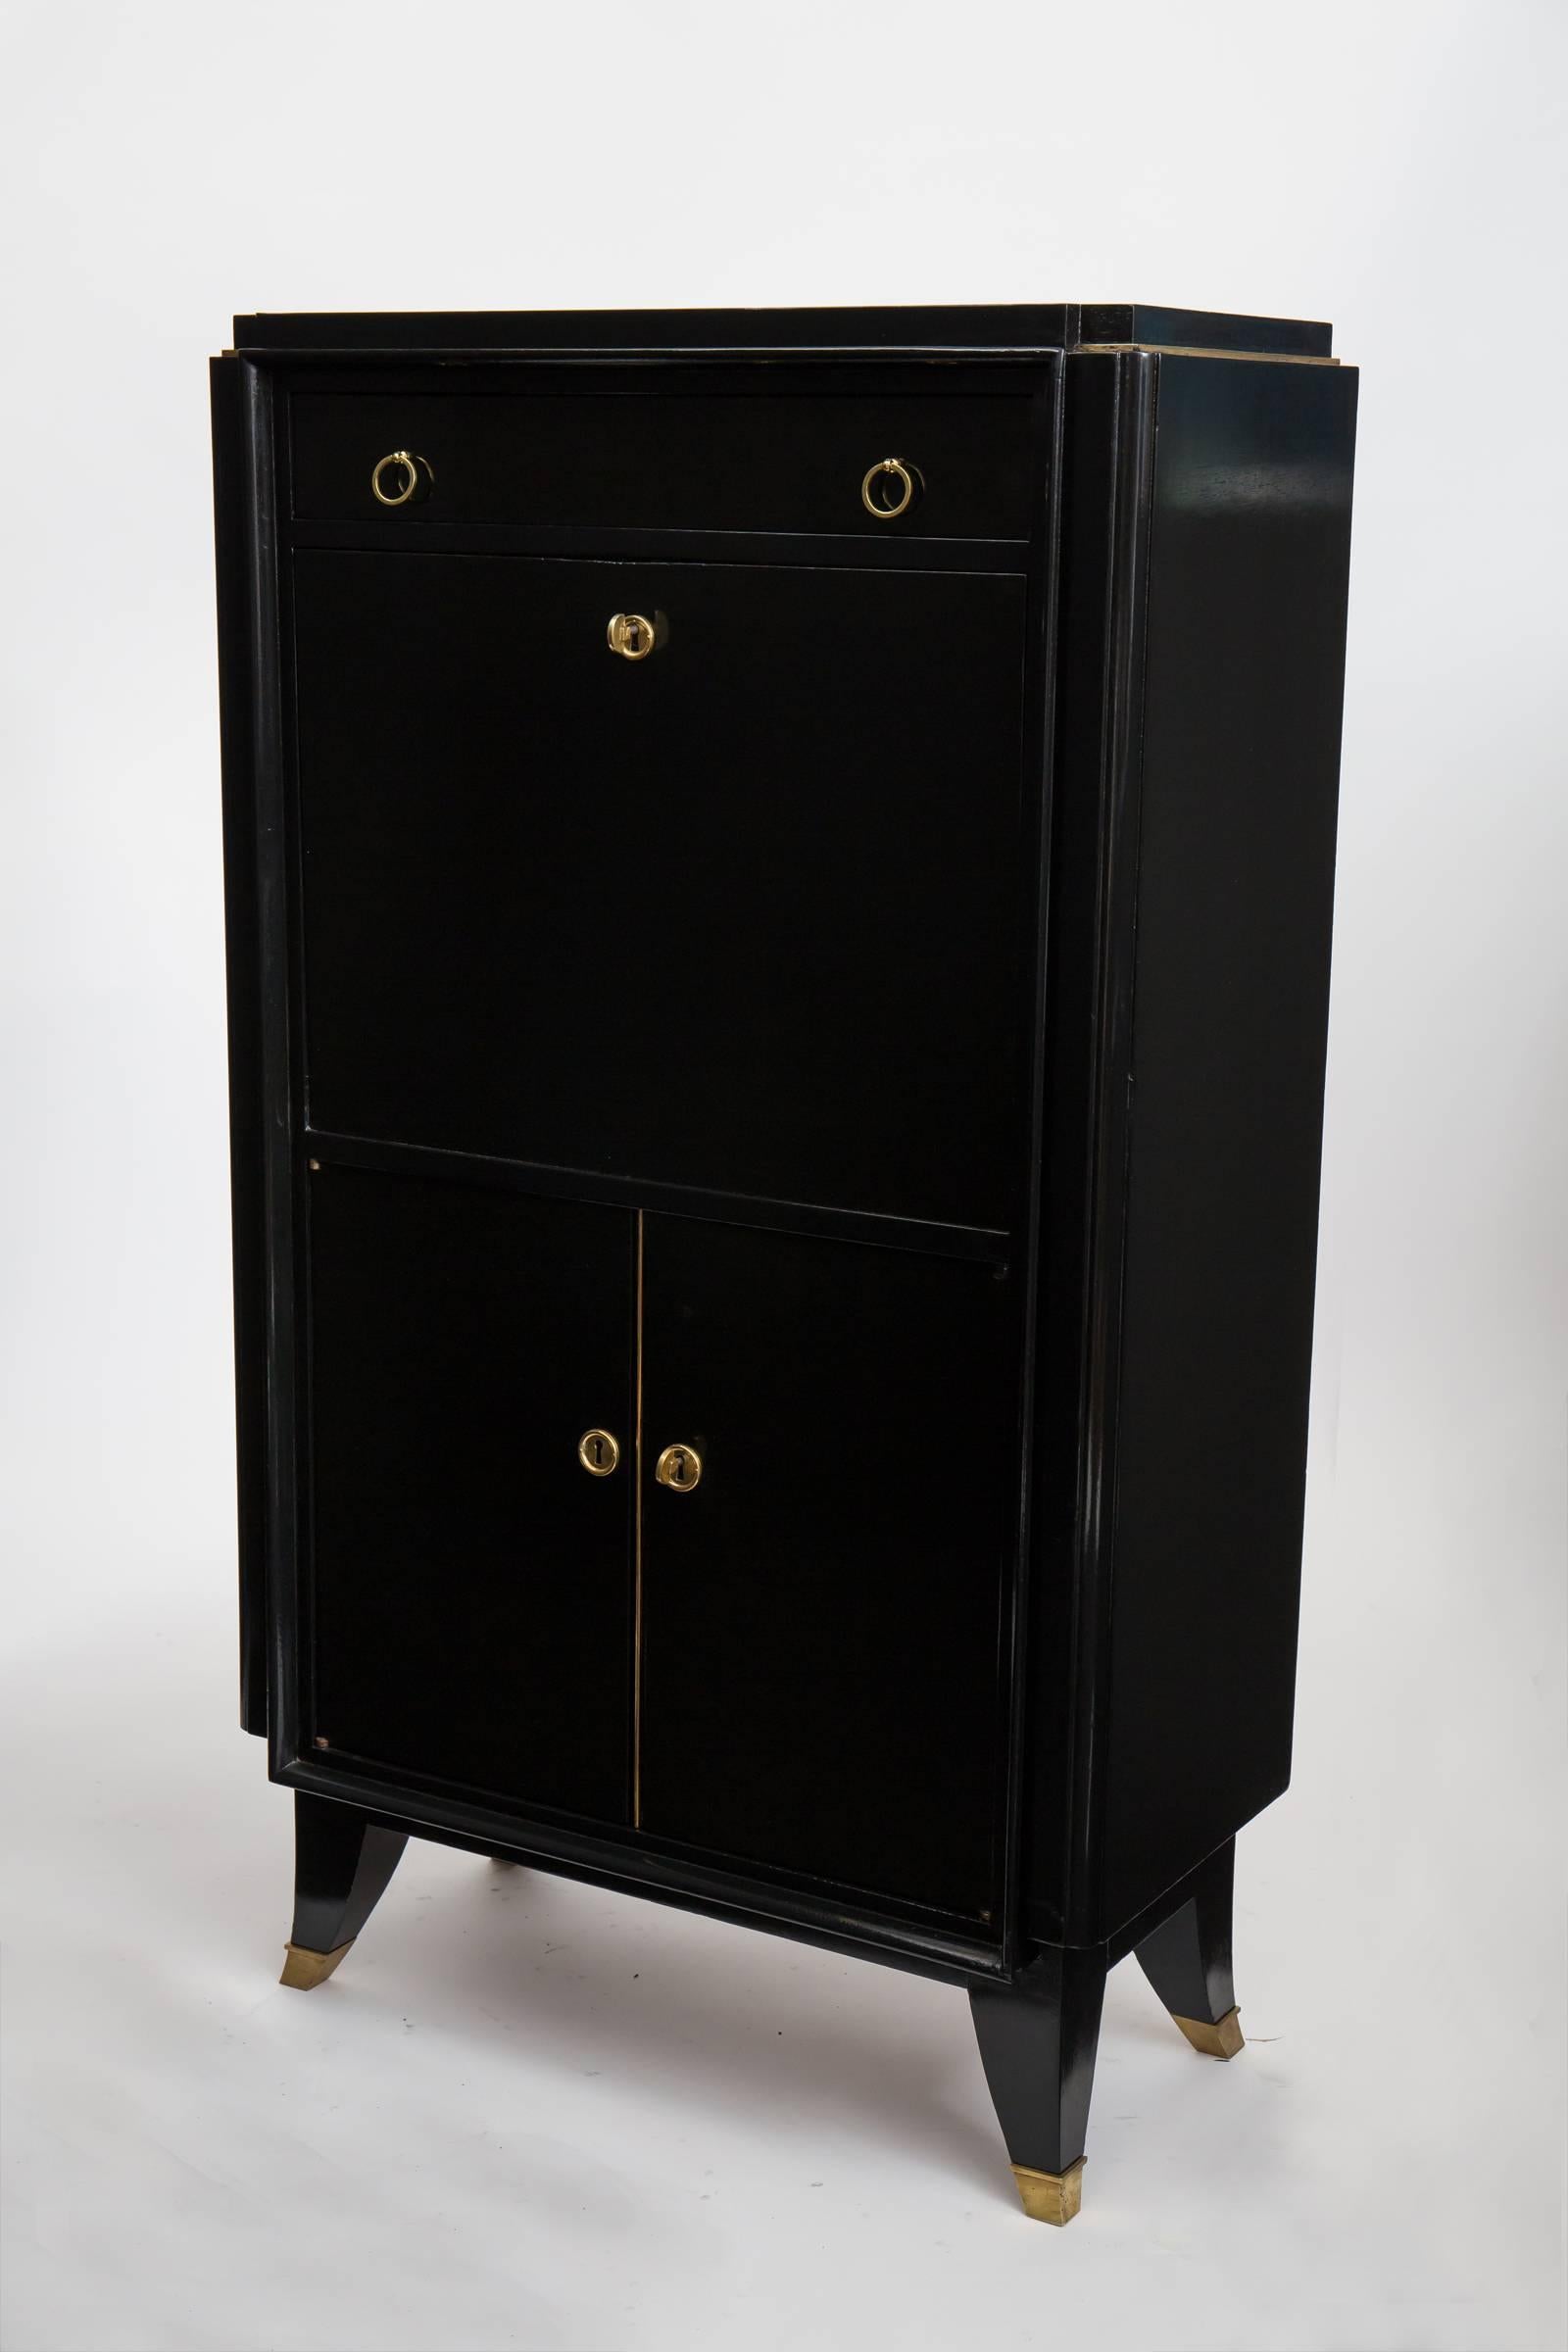 French Art Deco secretary of mahogany ebonized and French polished, a sleek piece with great lines, lemon wood interior, gilt brass details and an Argentinian leather top on the drop front.